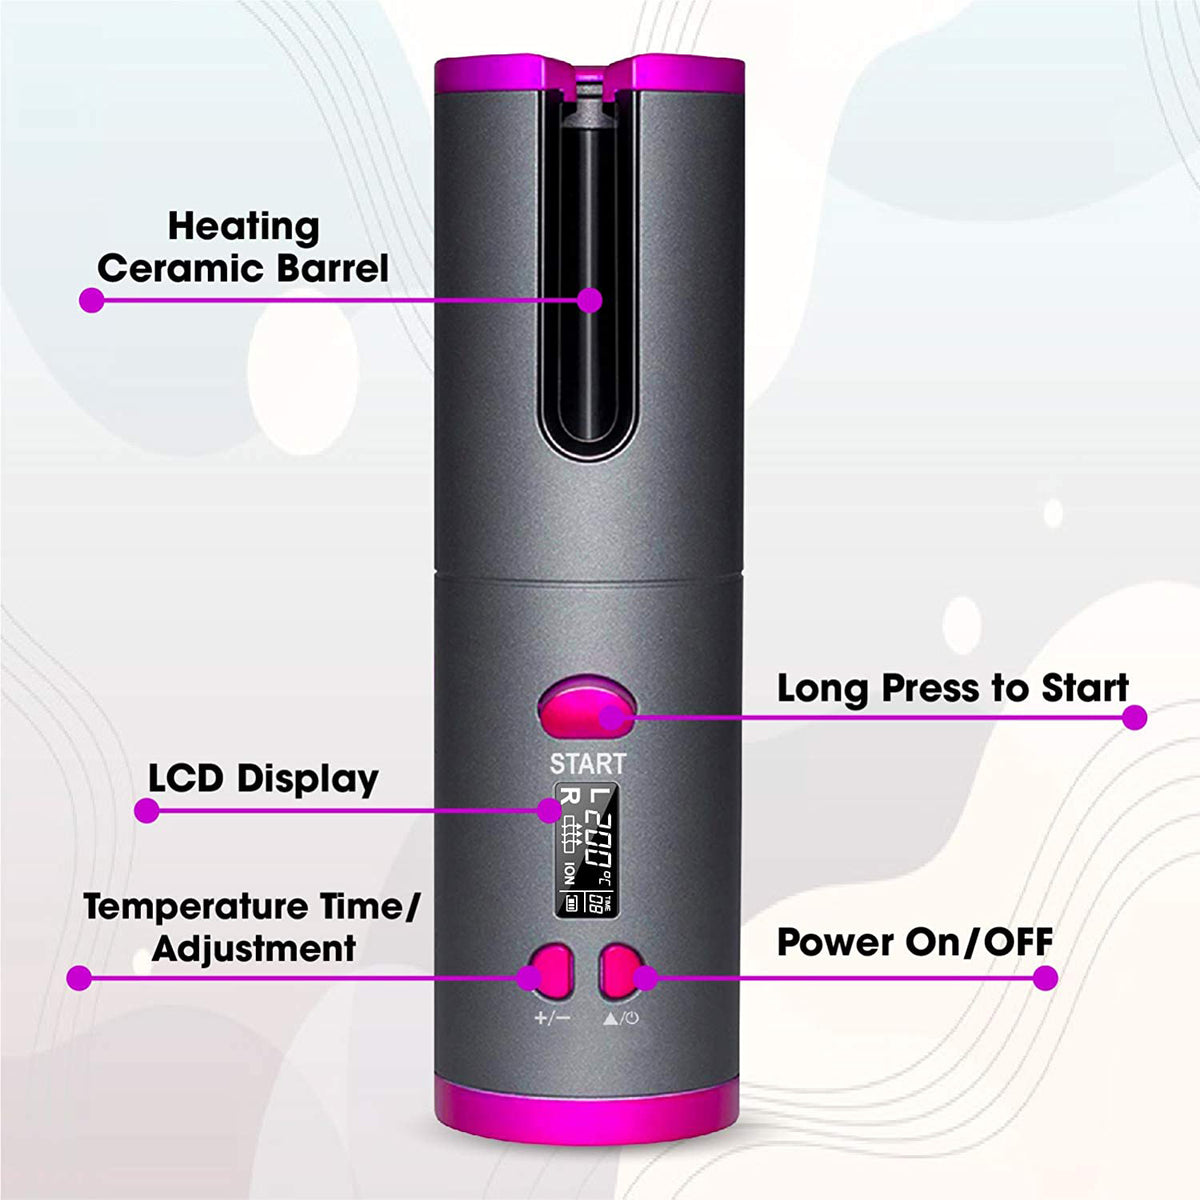 Cordless Ceramic Automatic Hair Curler in stylish grey and pink combo colour with descriptions of each element.